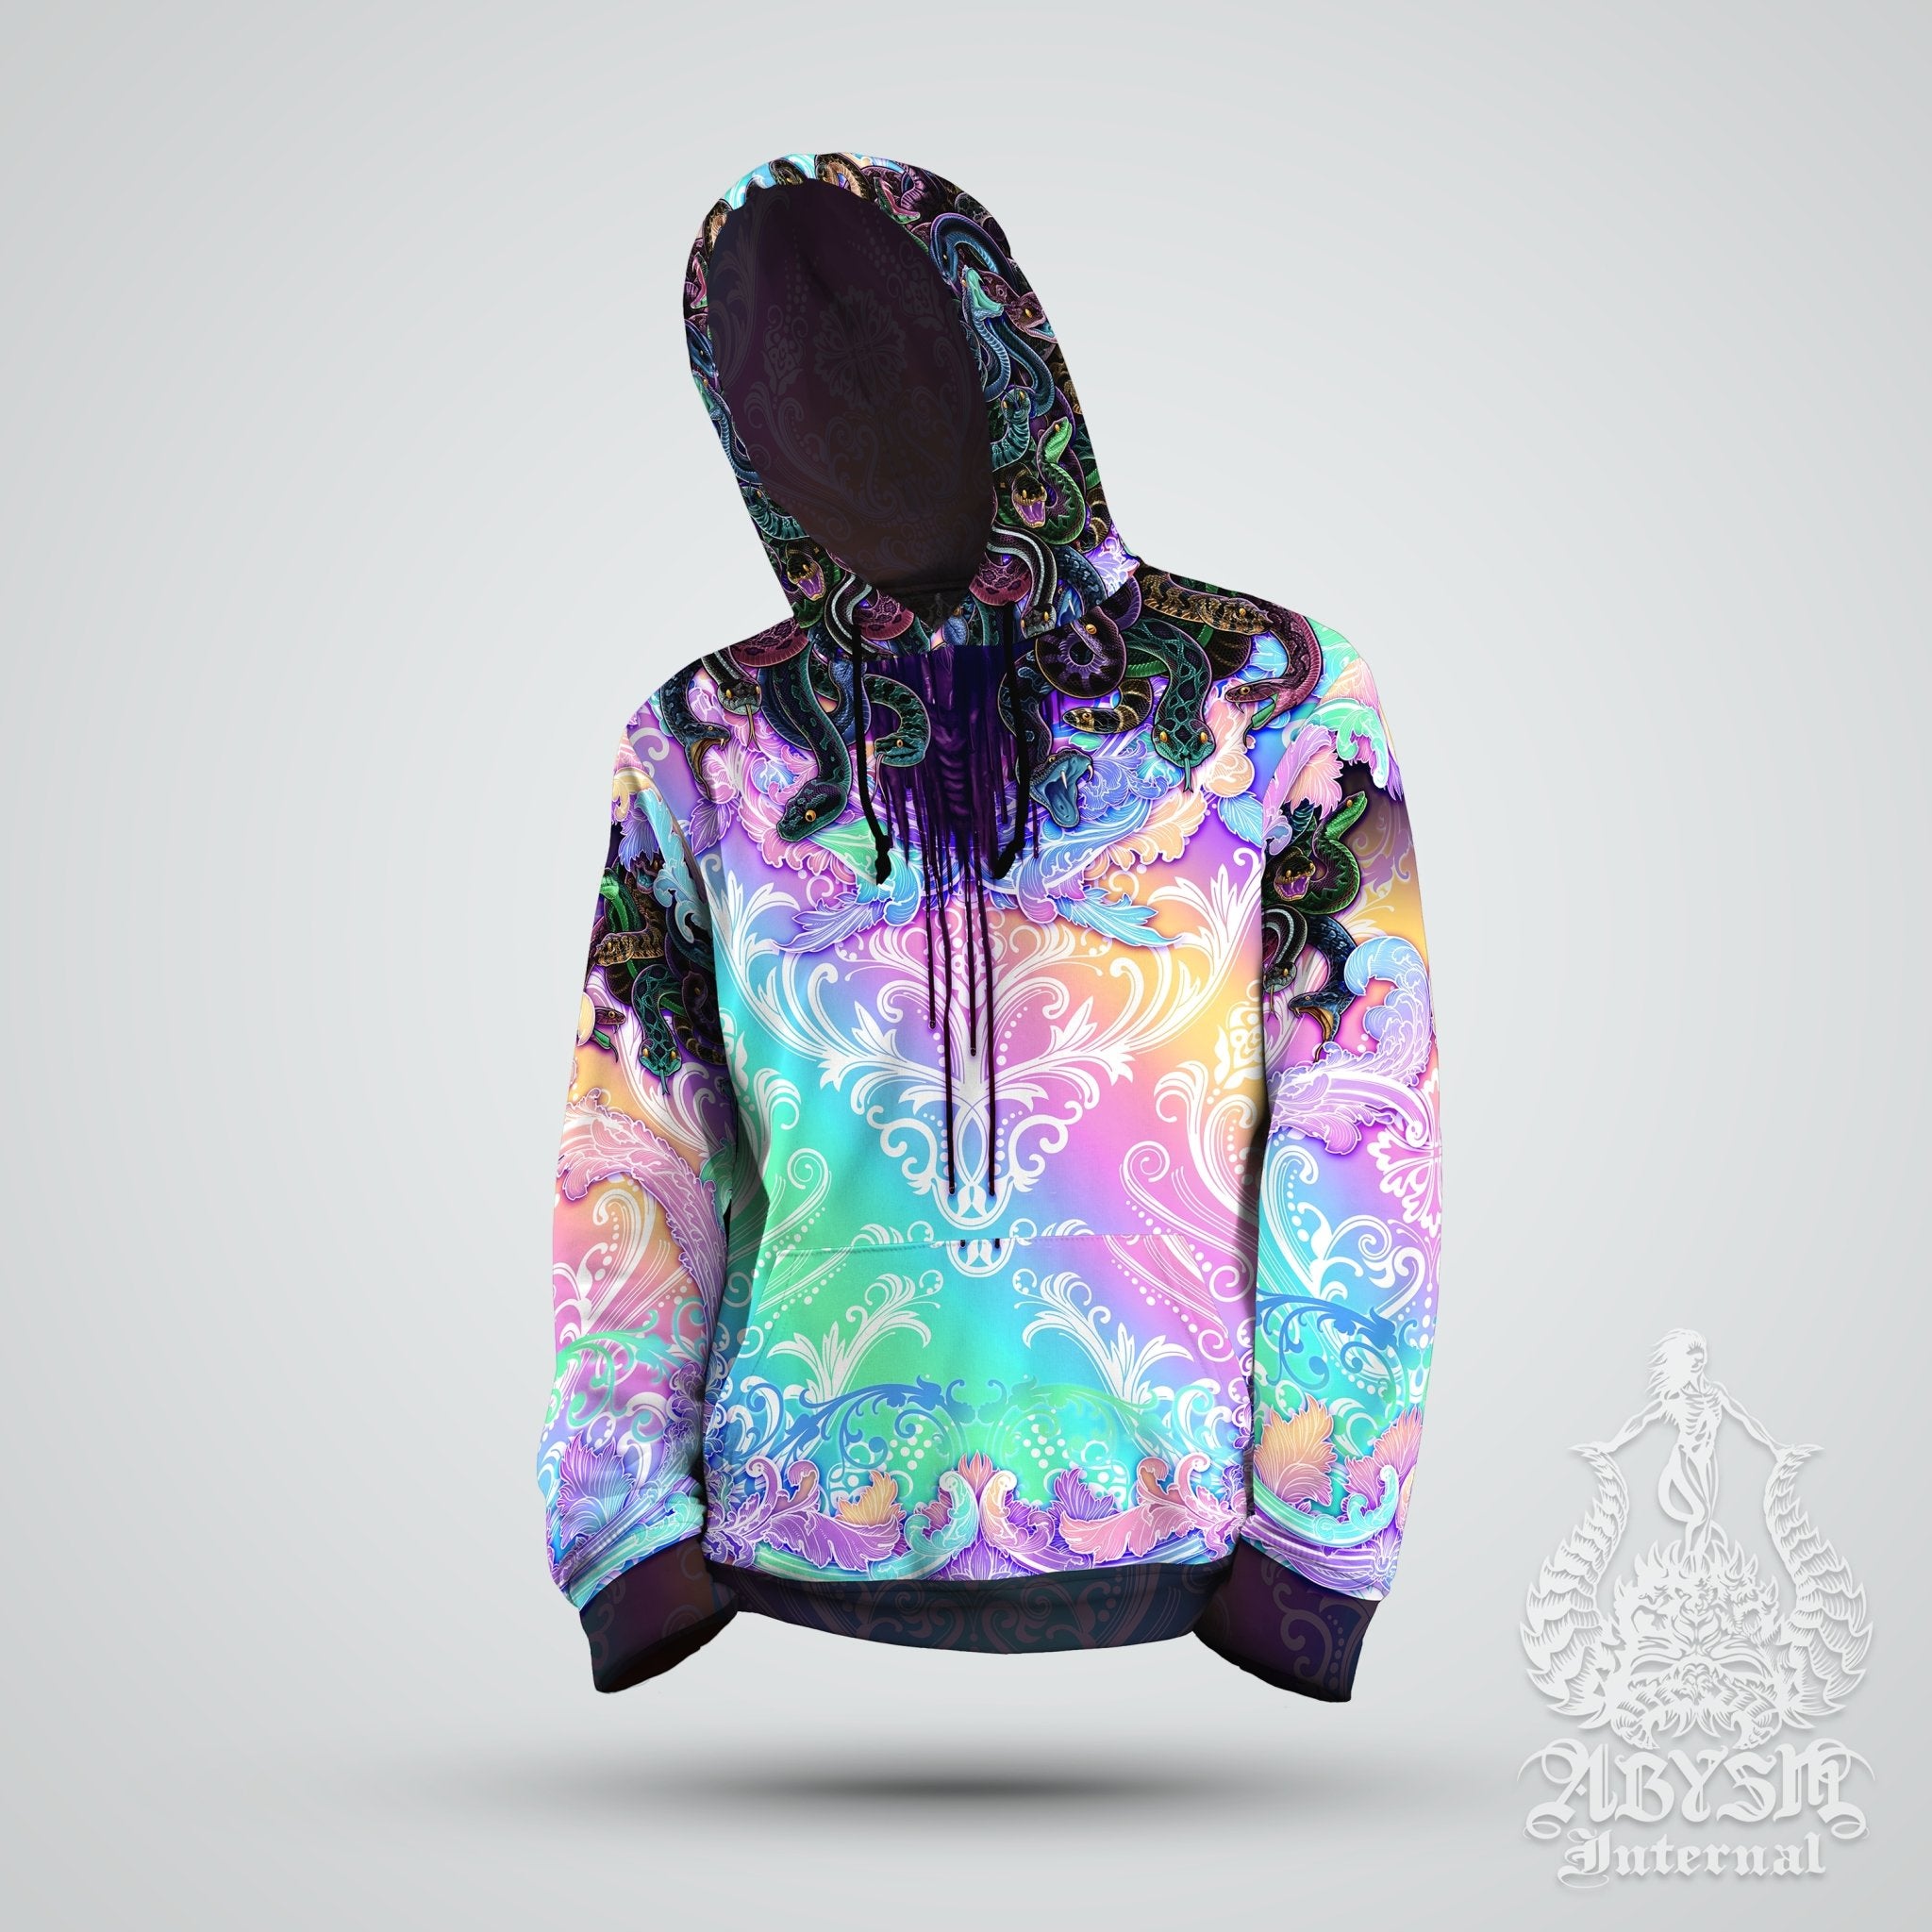 Psychedelic Hoodie, Aesthetic Streetwear, Rave Outfit, Holographic and Trippy Festival Sweater, Pastel Punk Black Clothing, Unisex - Medusa - Abysm Internal